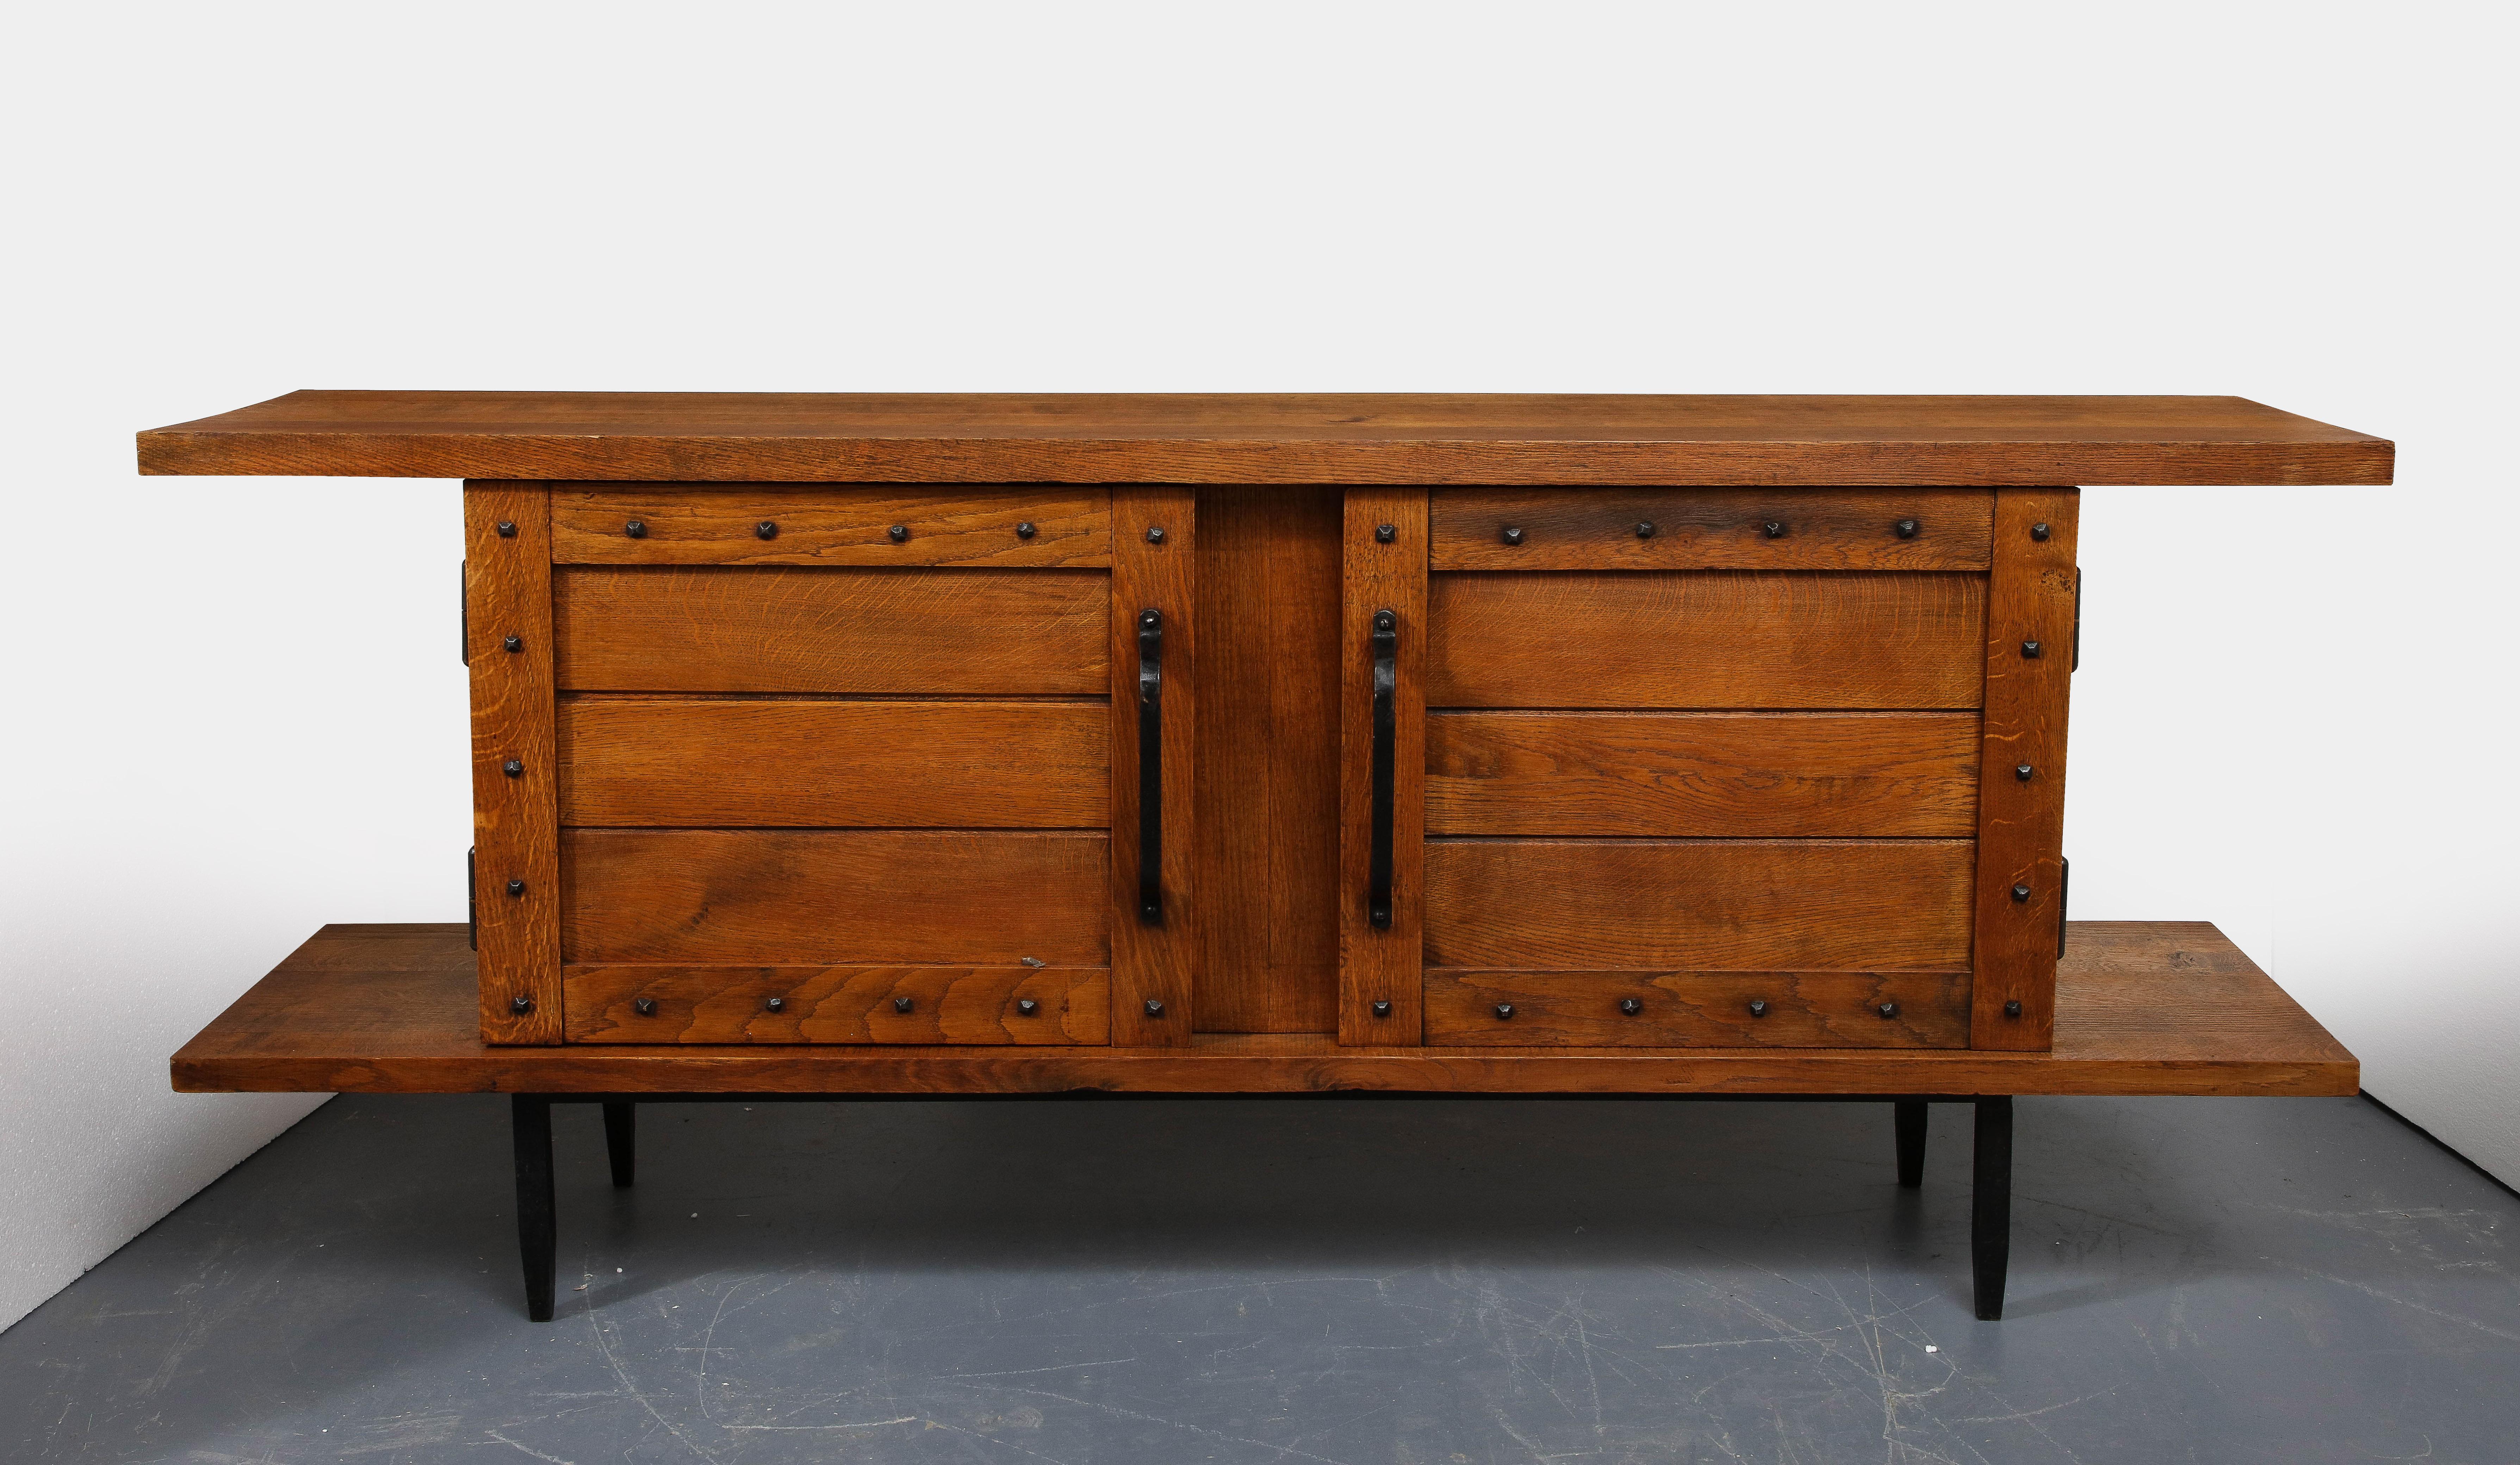 Oak and Iron Sideboard by the Artisans of Les Marolles, France, mid-20th century.

Both rustic and minimalist in design, this fantastic sideboard exhibits all of the mainstays of work produced by the Artistans of Les Marolles: solid oak